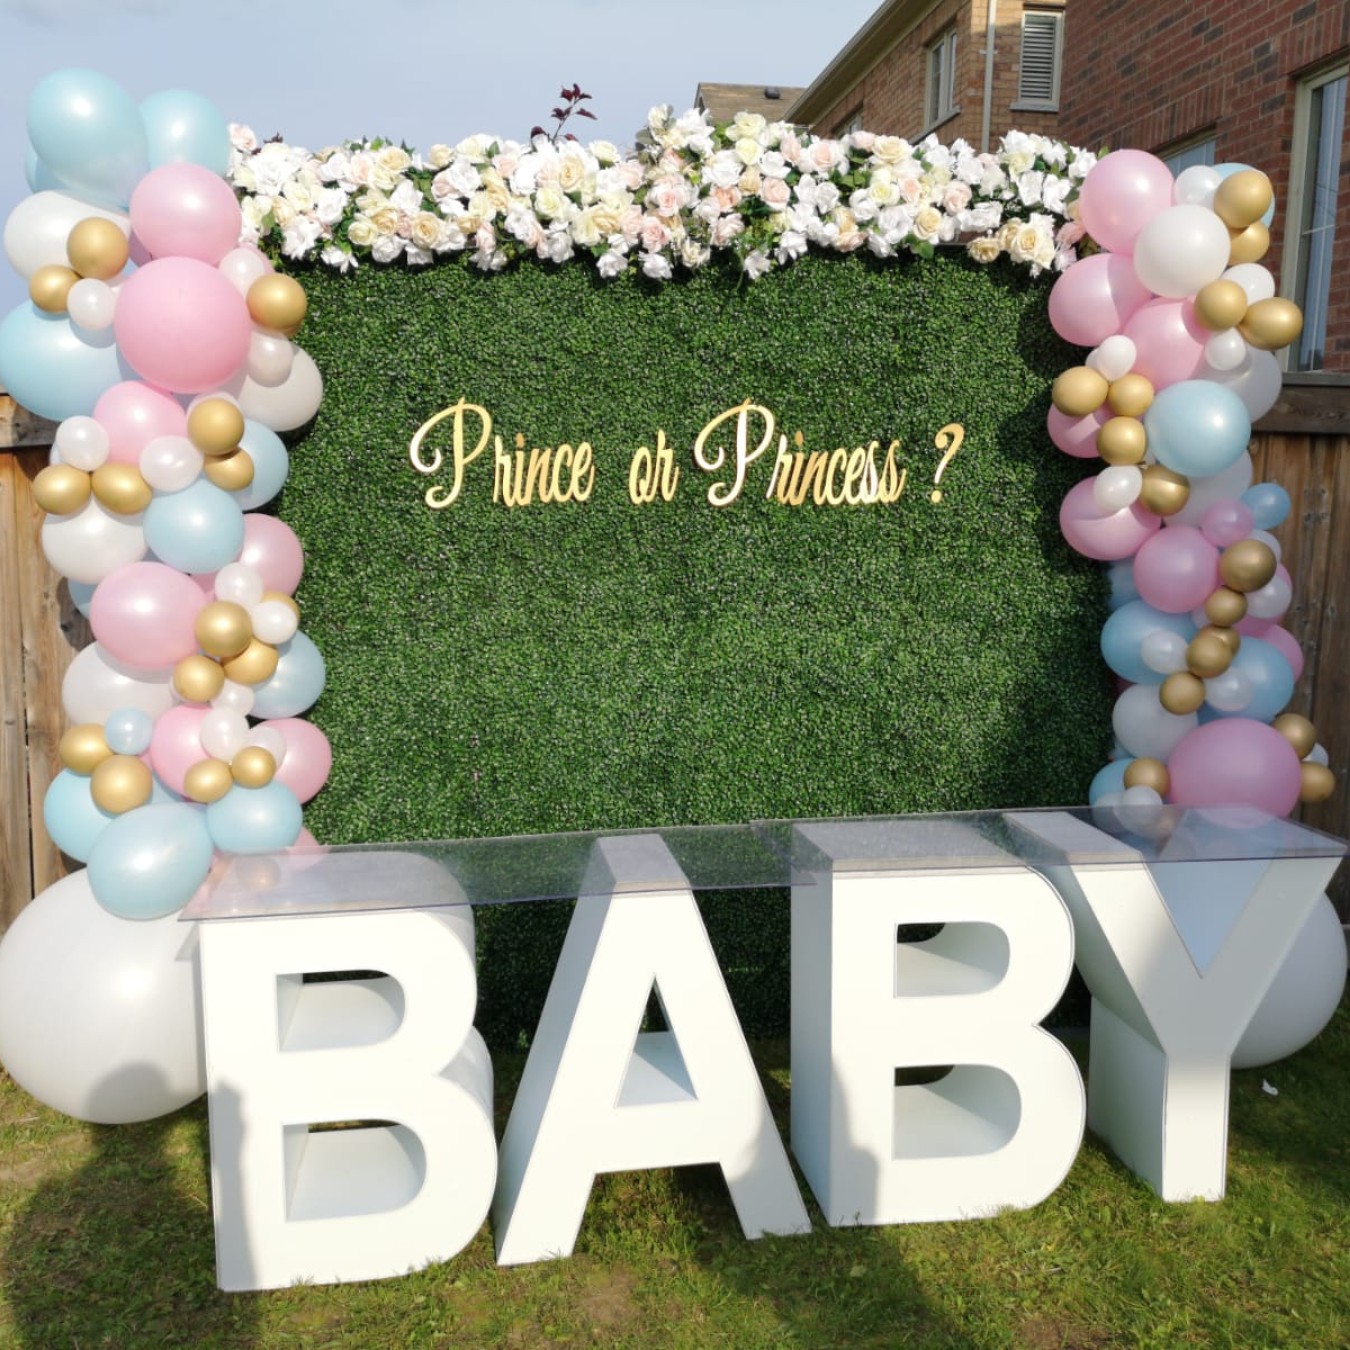 BABY Marquee Block Letters Table Rental